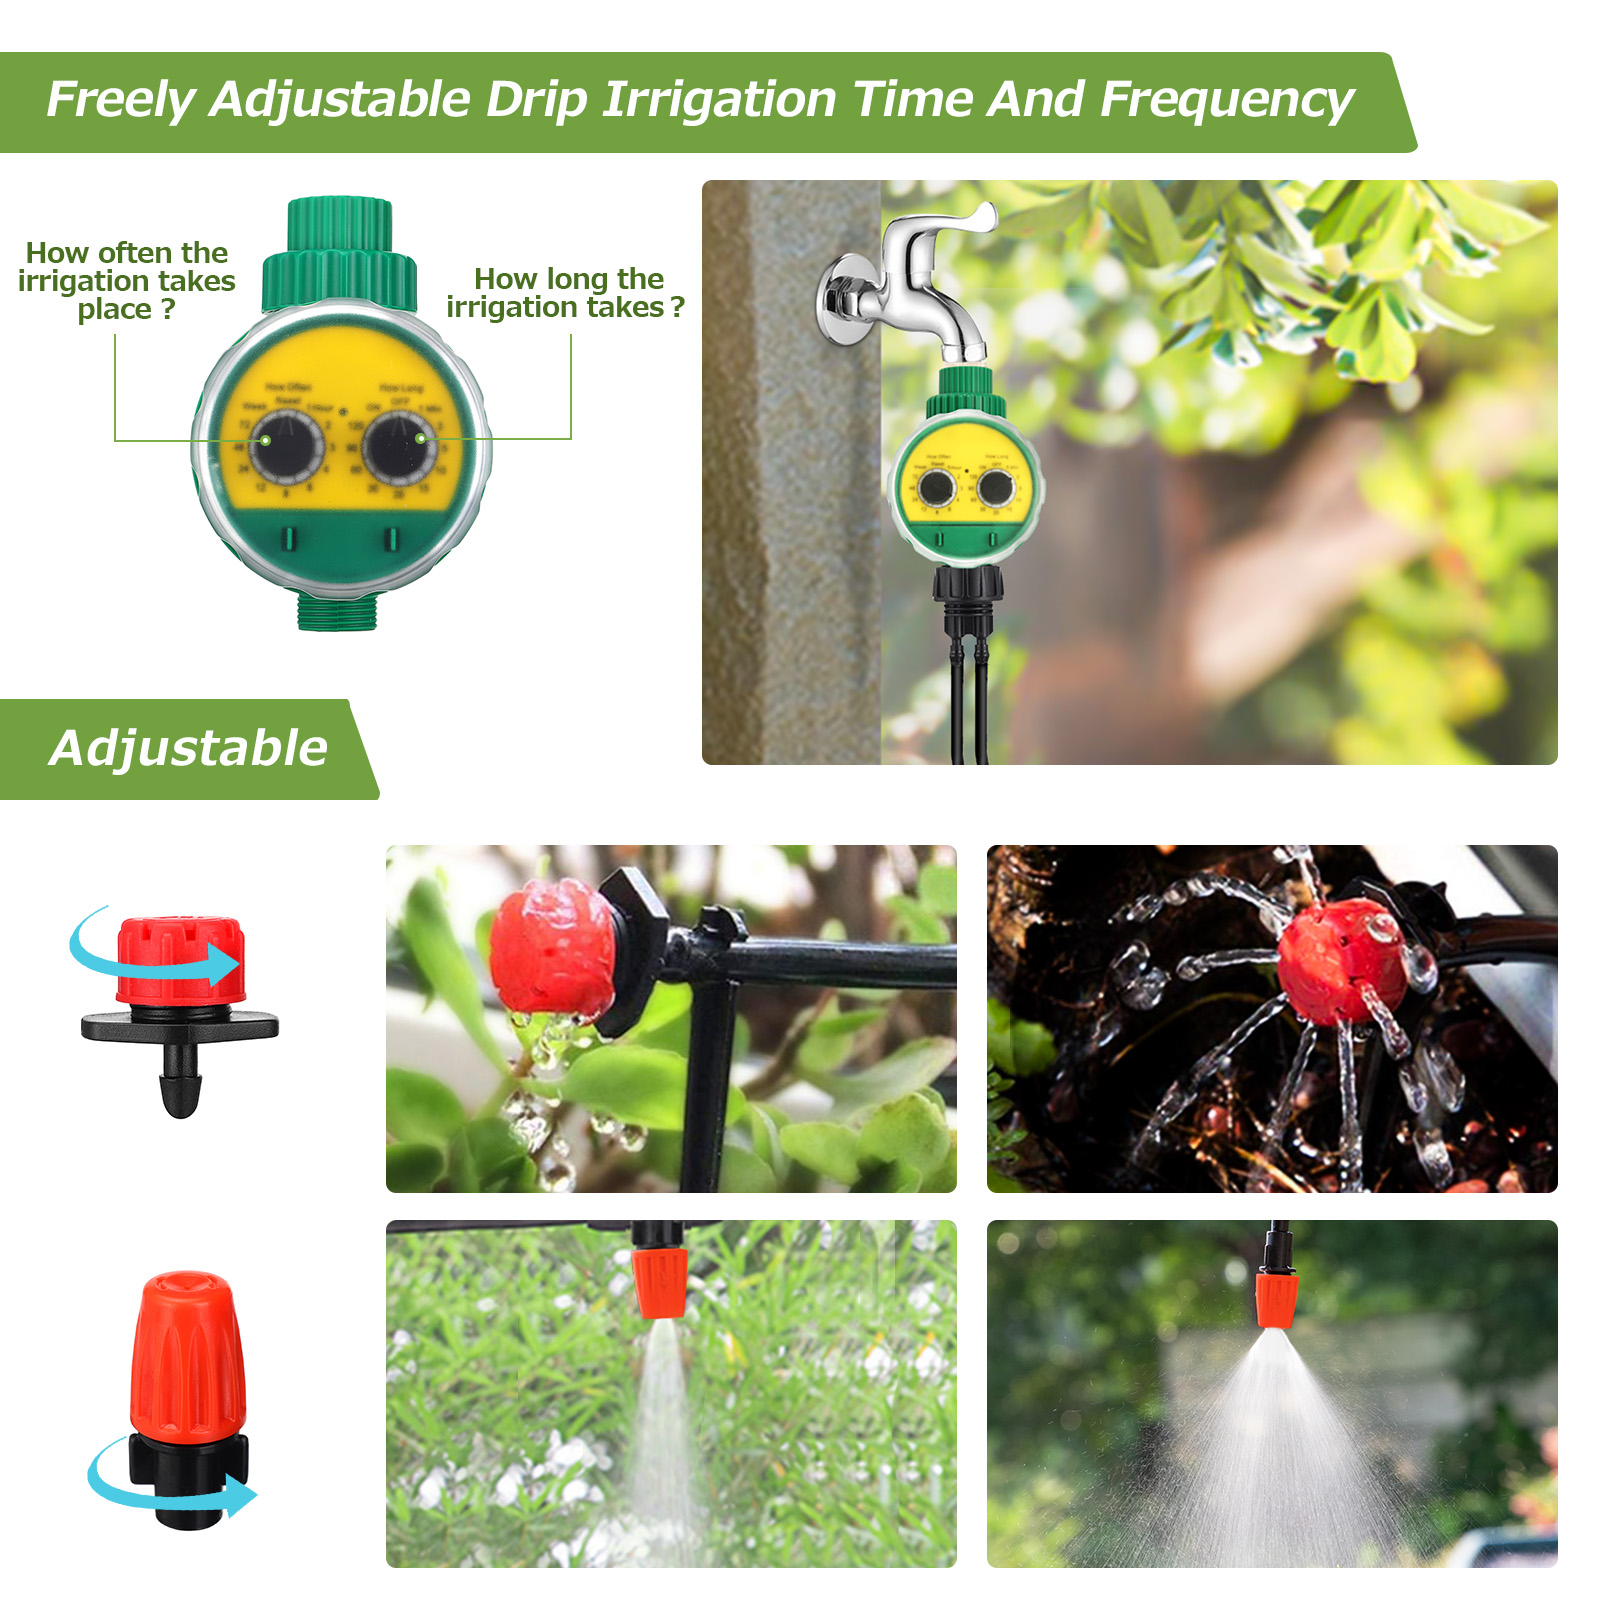 KING-DO-WAY-Drip-Irrigation-Kit-with-Water-Timer-Water-Pipe-and-Full-Language-Manual-and-Other-Acces-1829777-4